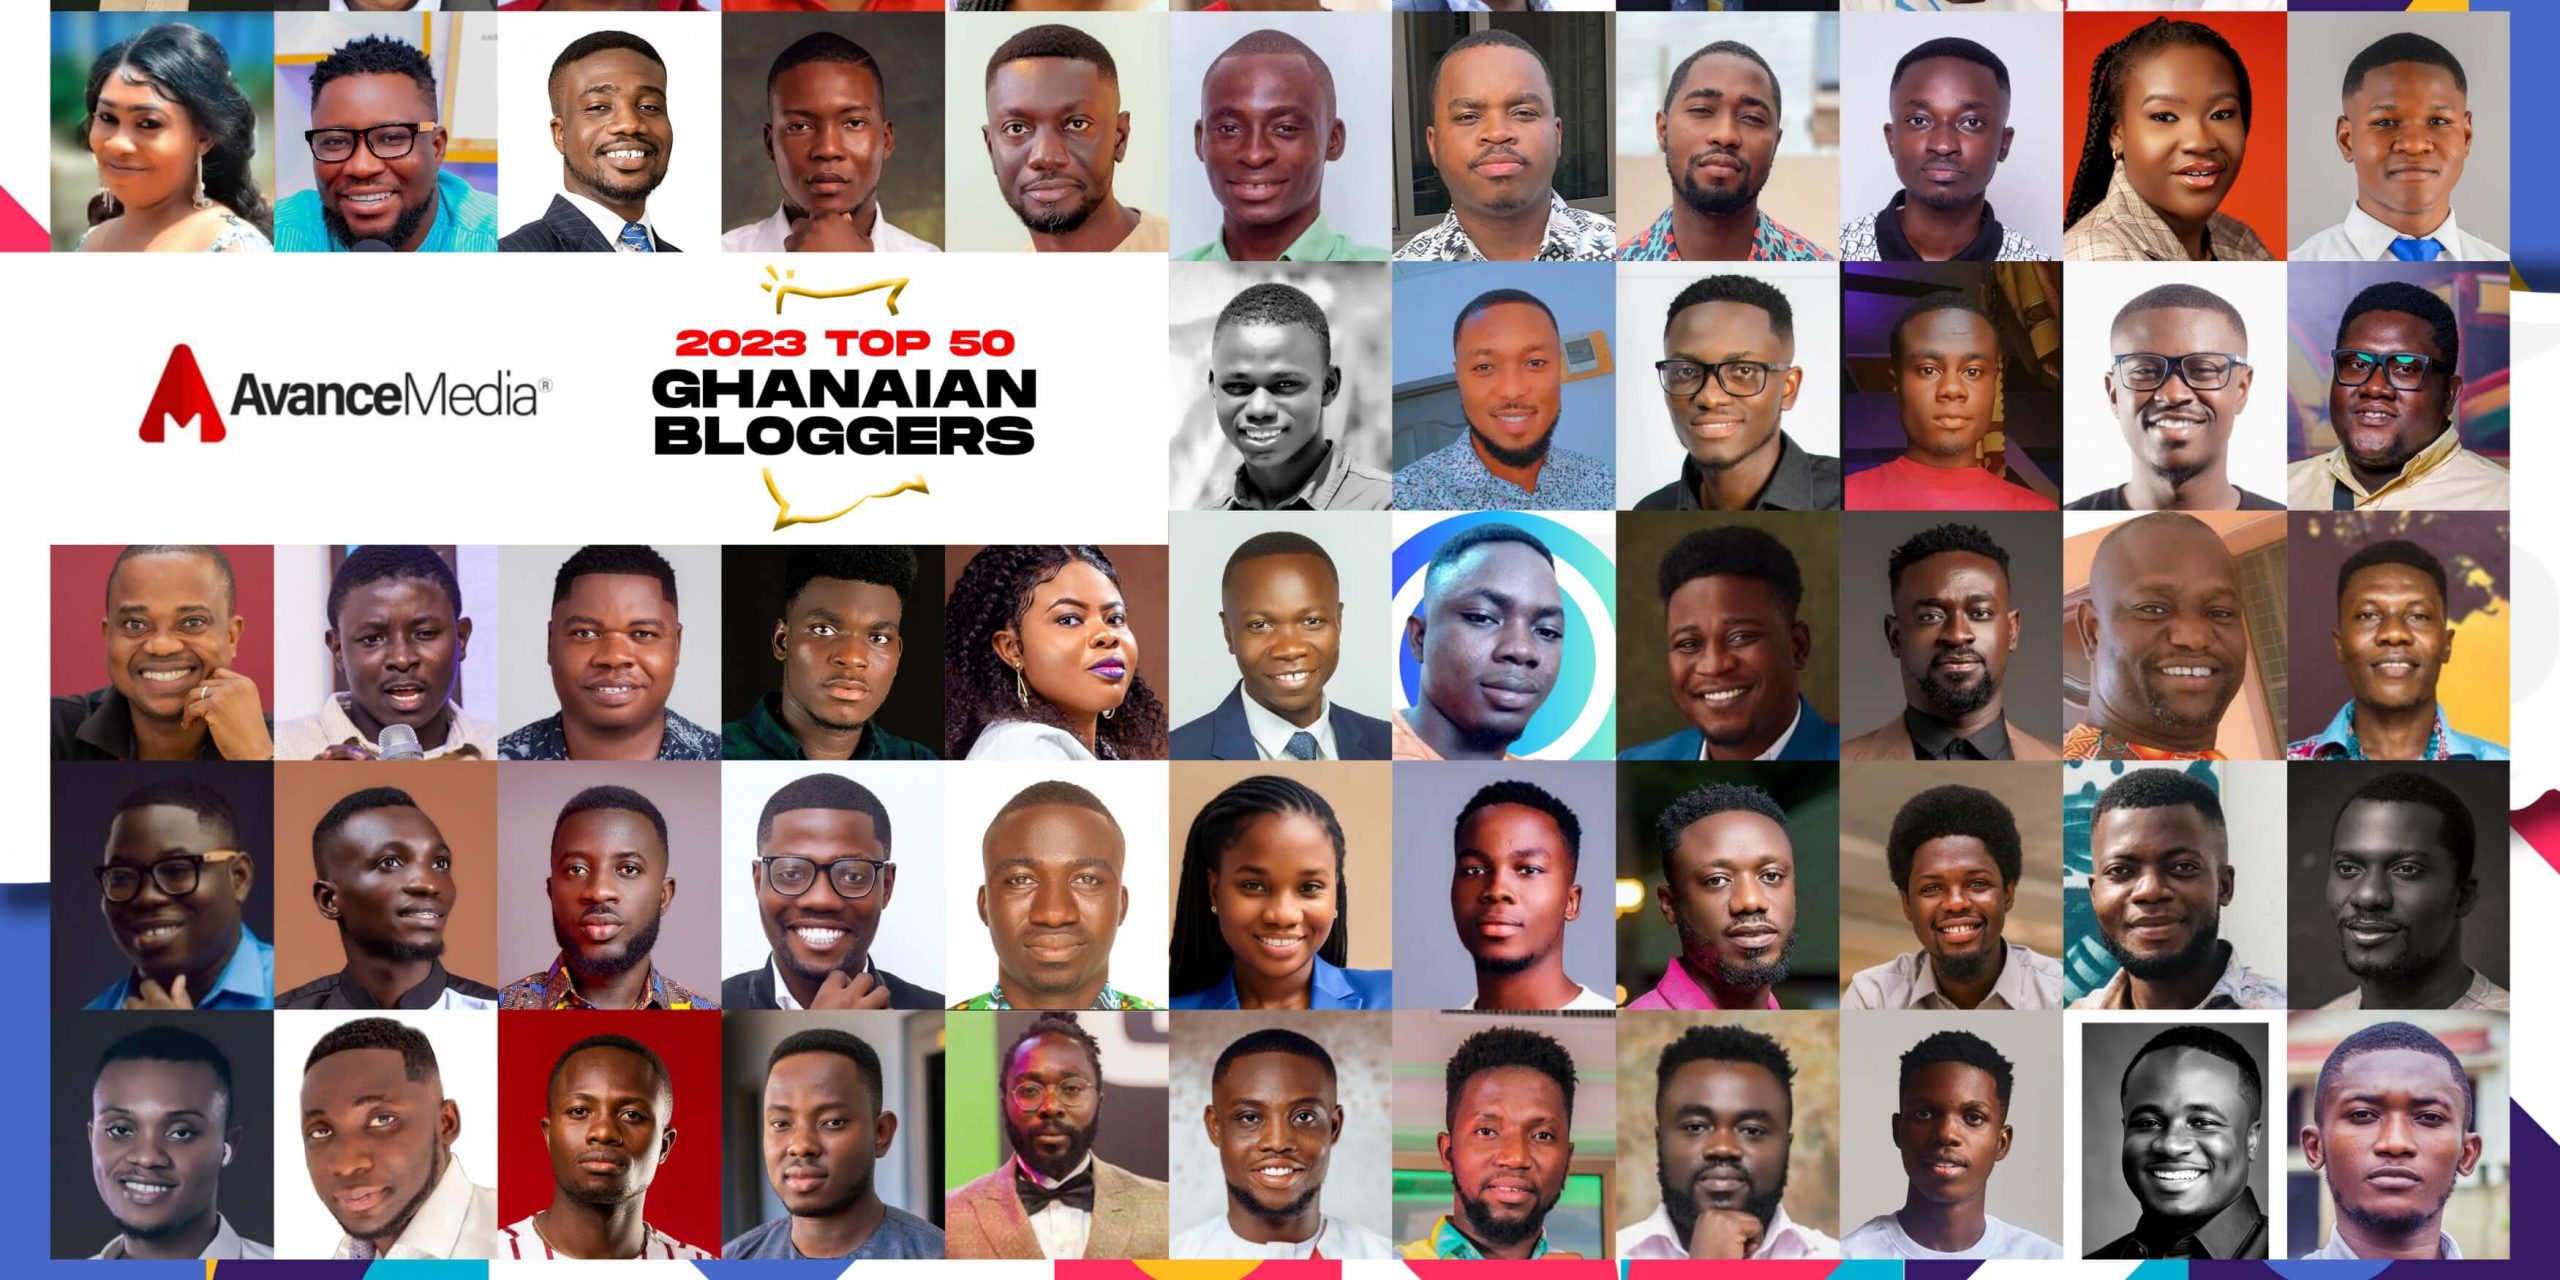 2023 Top 50 Ghanaian Bloggers collage